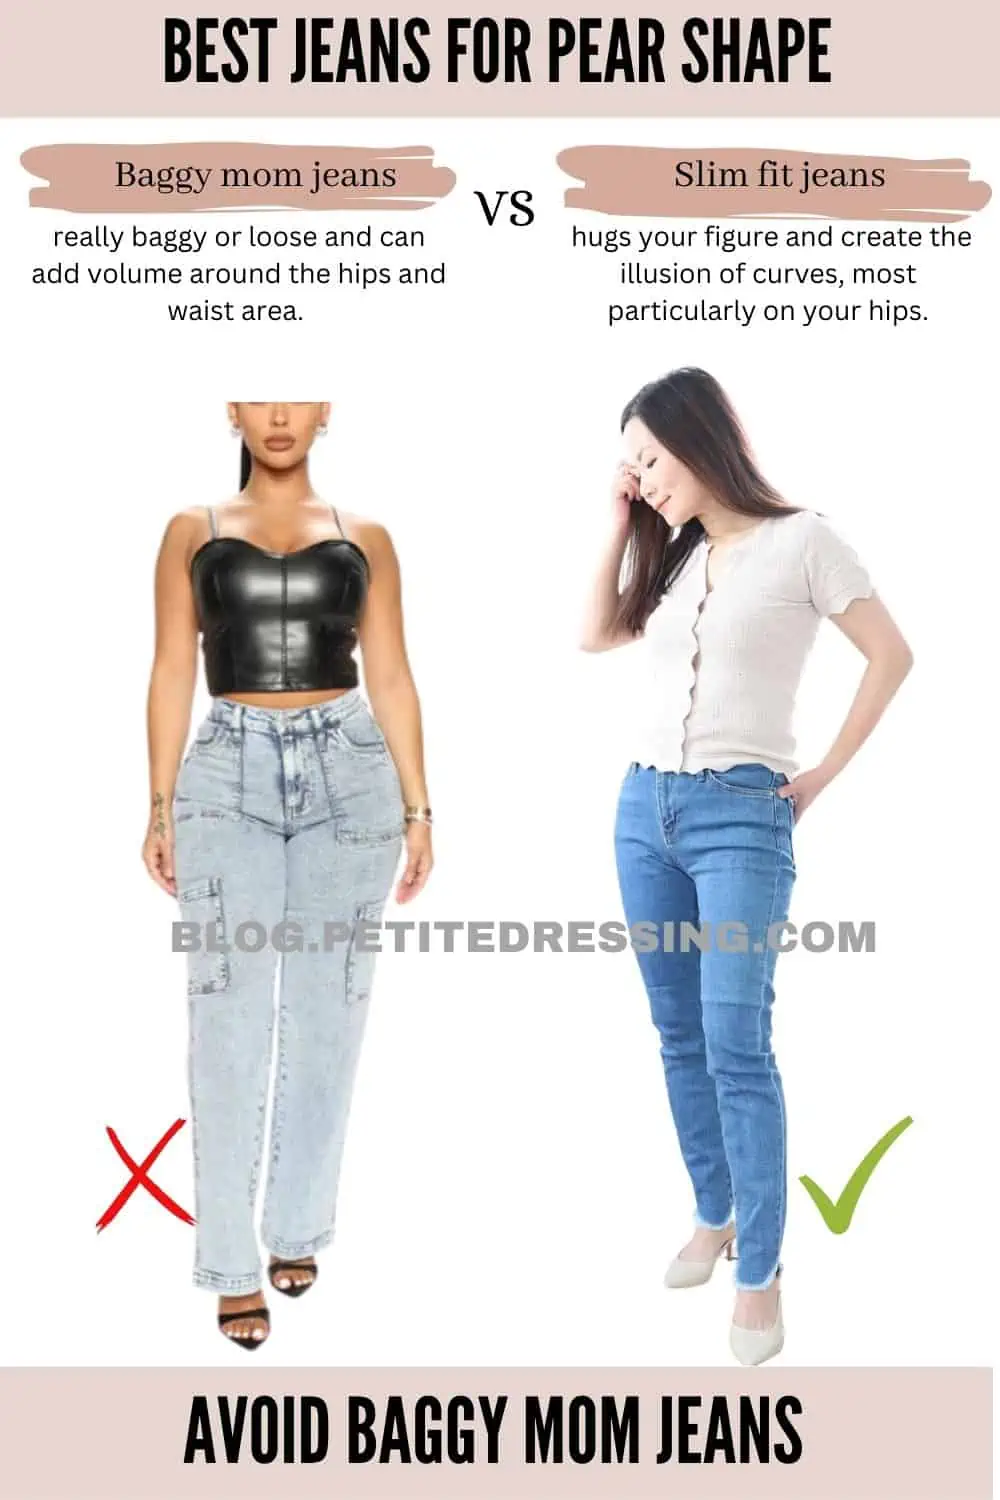 The Complete Jeans Guide for Pear Shape - Petite Dressing